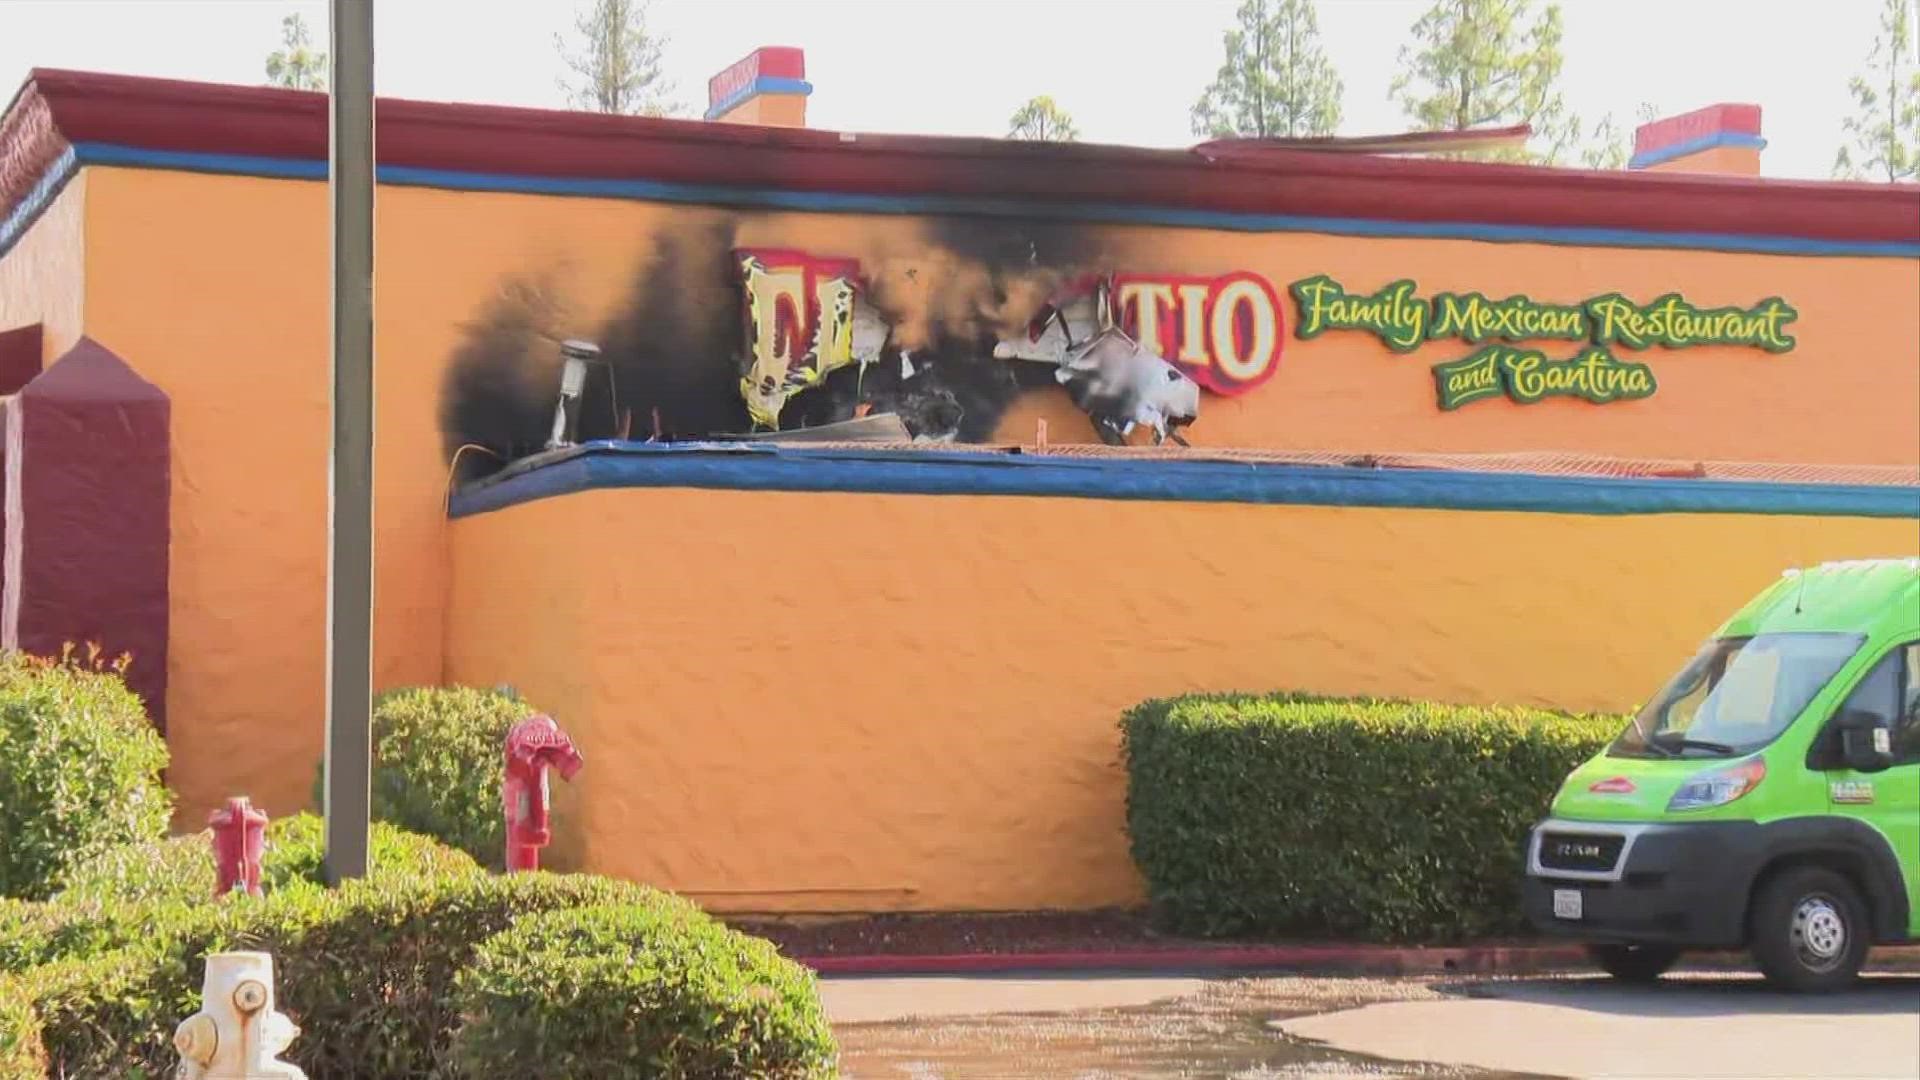 The Wednesday morning fire occurred at El Tapatio Family Mexican Restaurant just after 7 a.m. where Sacramento Metro Fire reports there were no injuries.